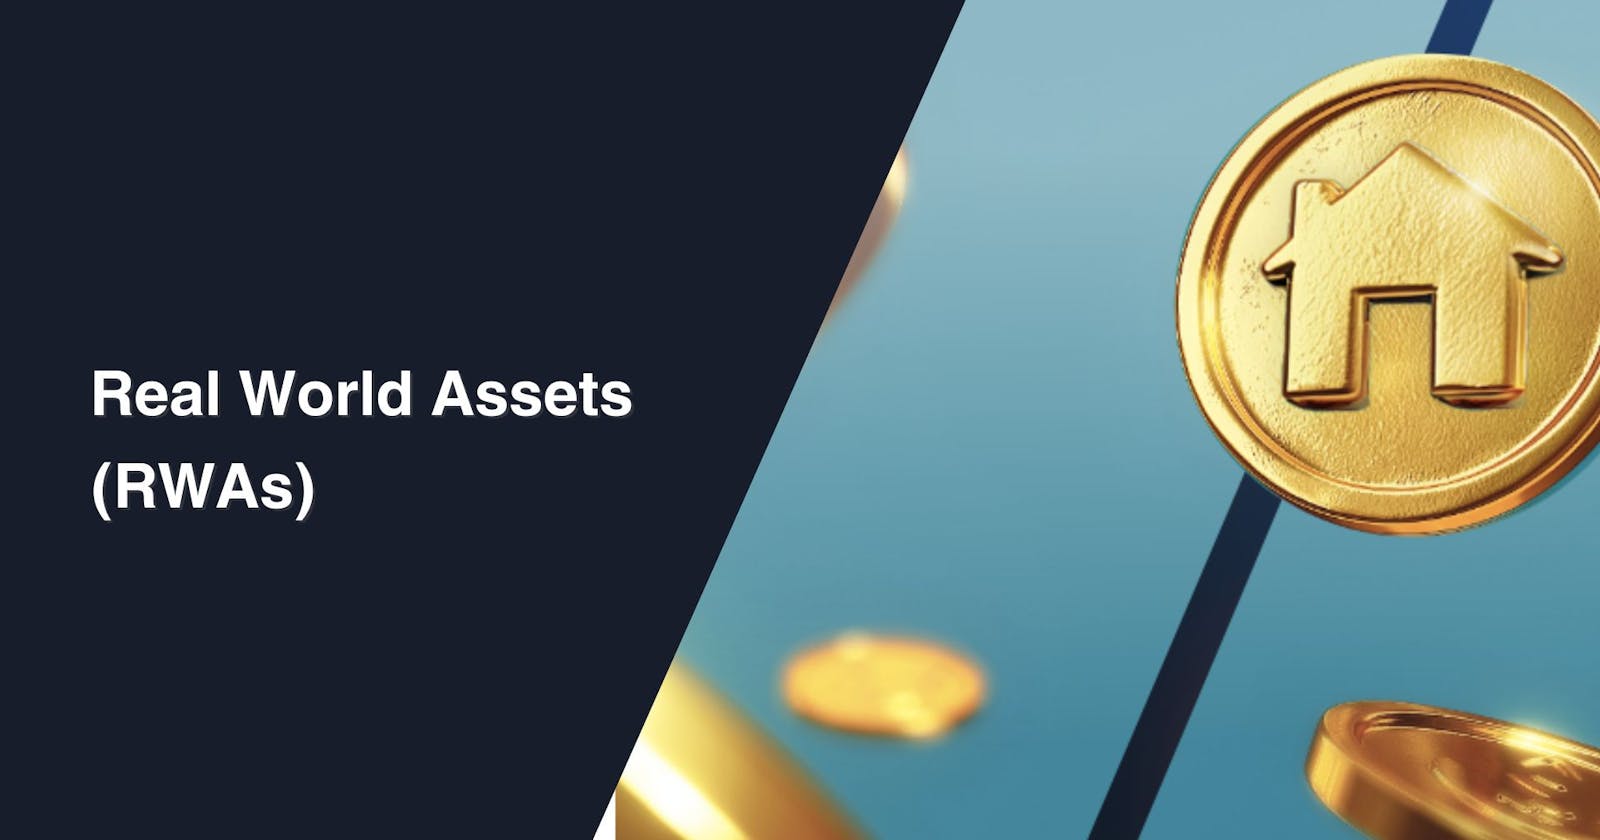 What are Real World Assets (RWAs)?